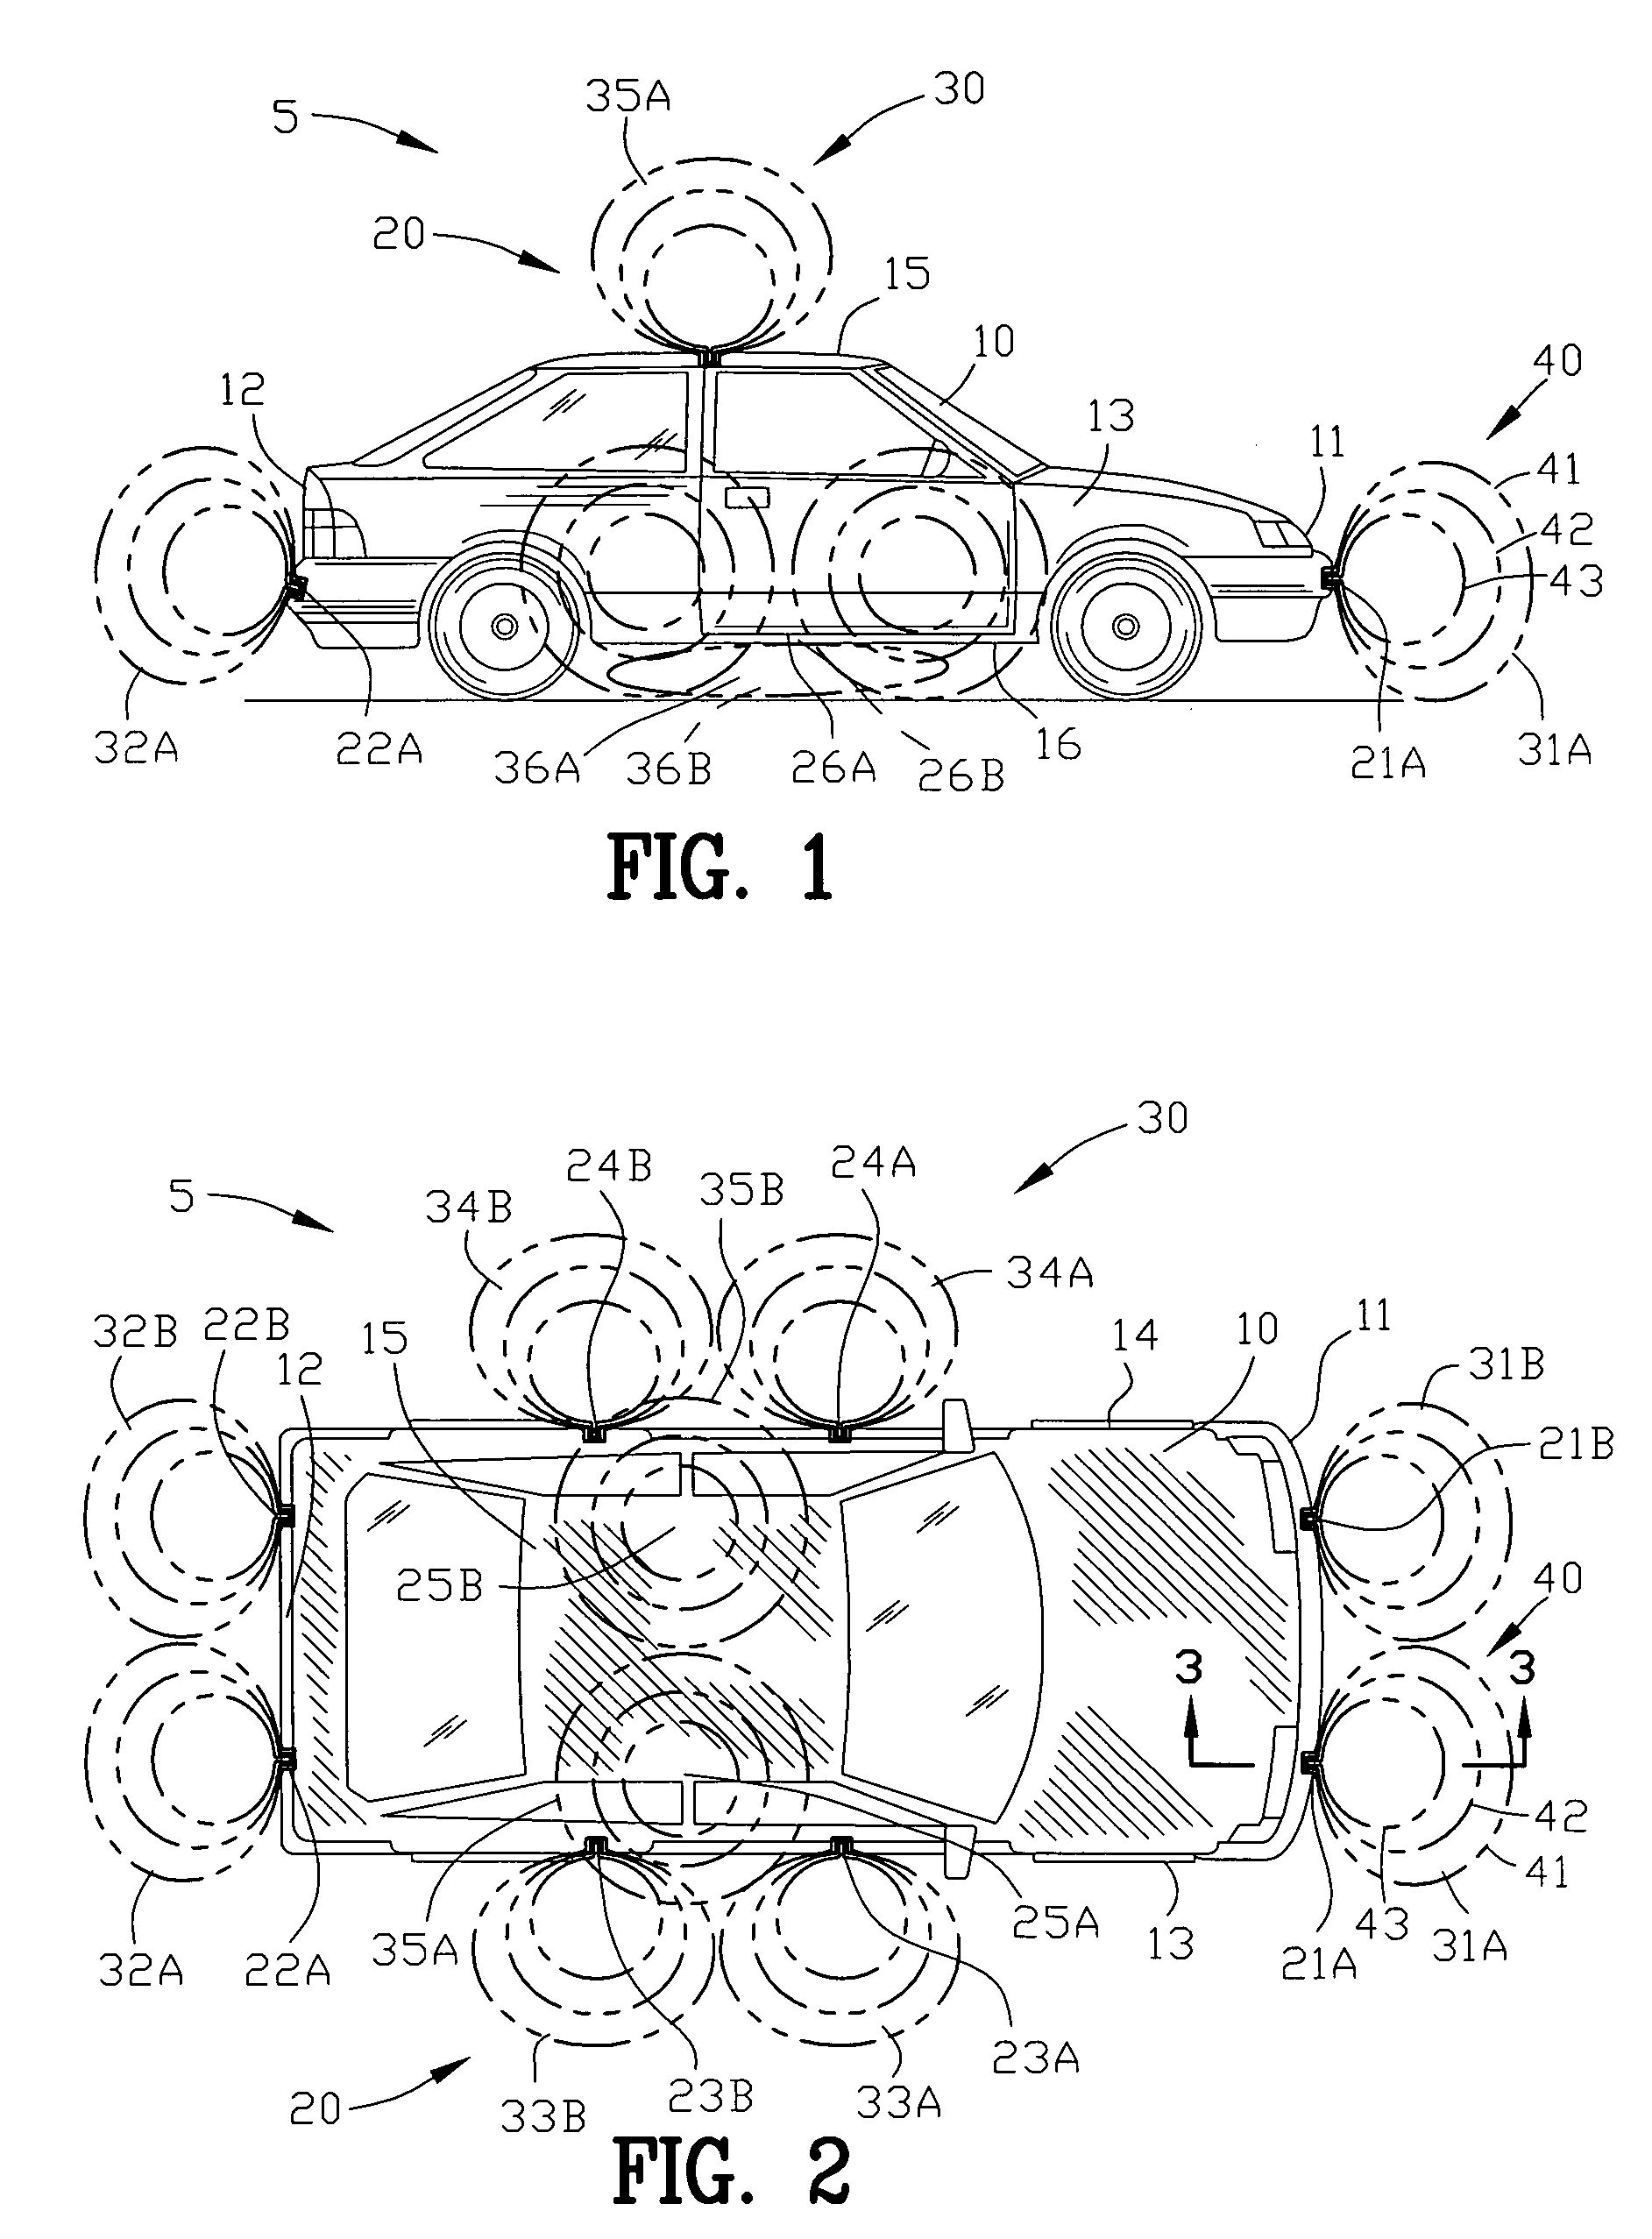 Collision air bag and flotation system